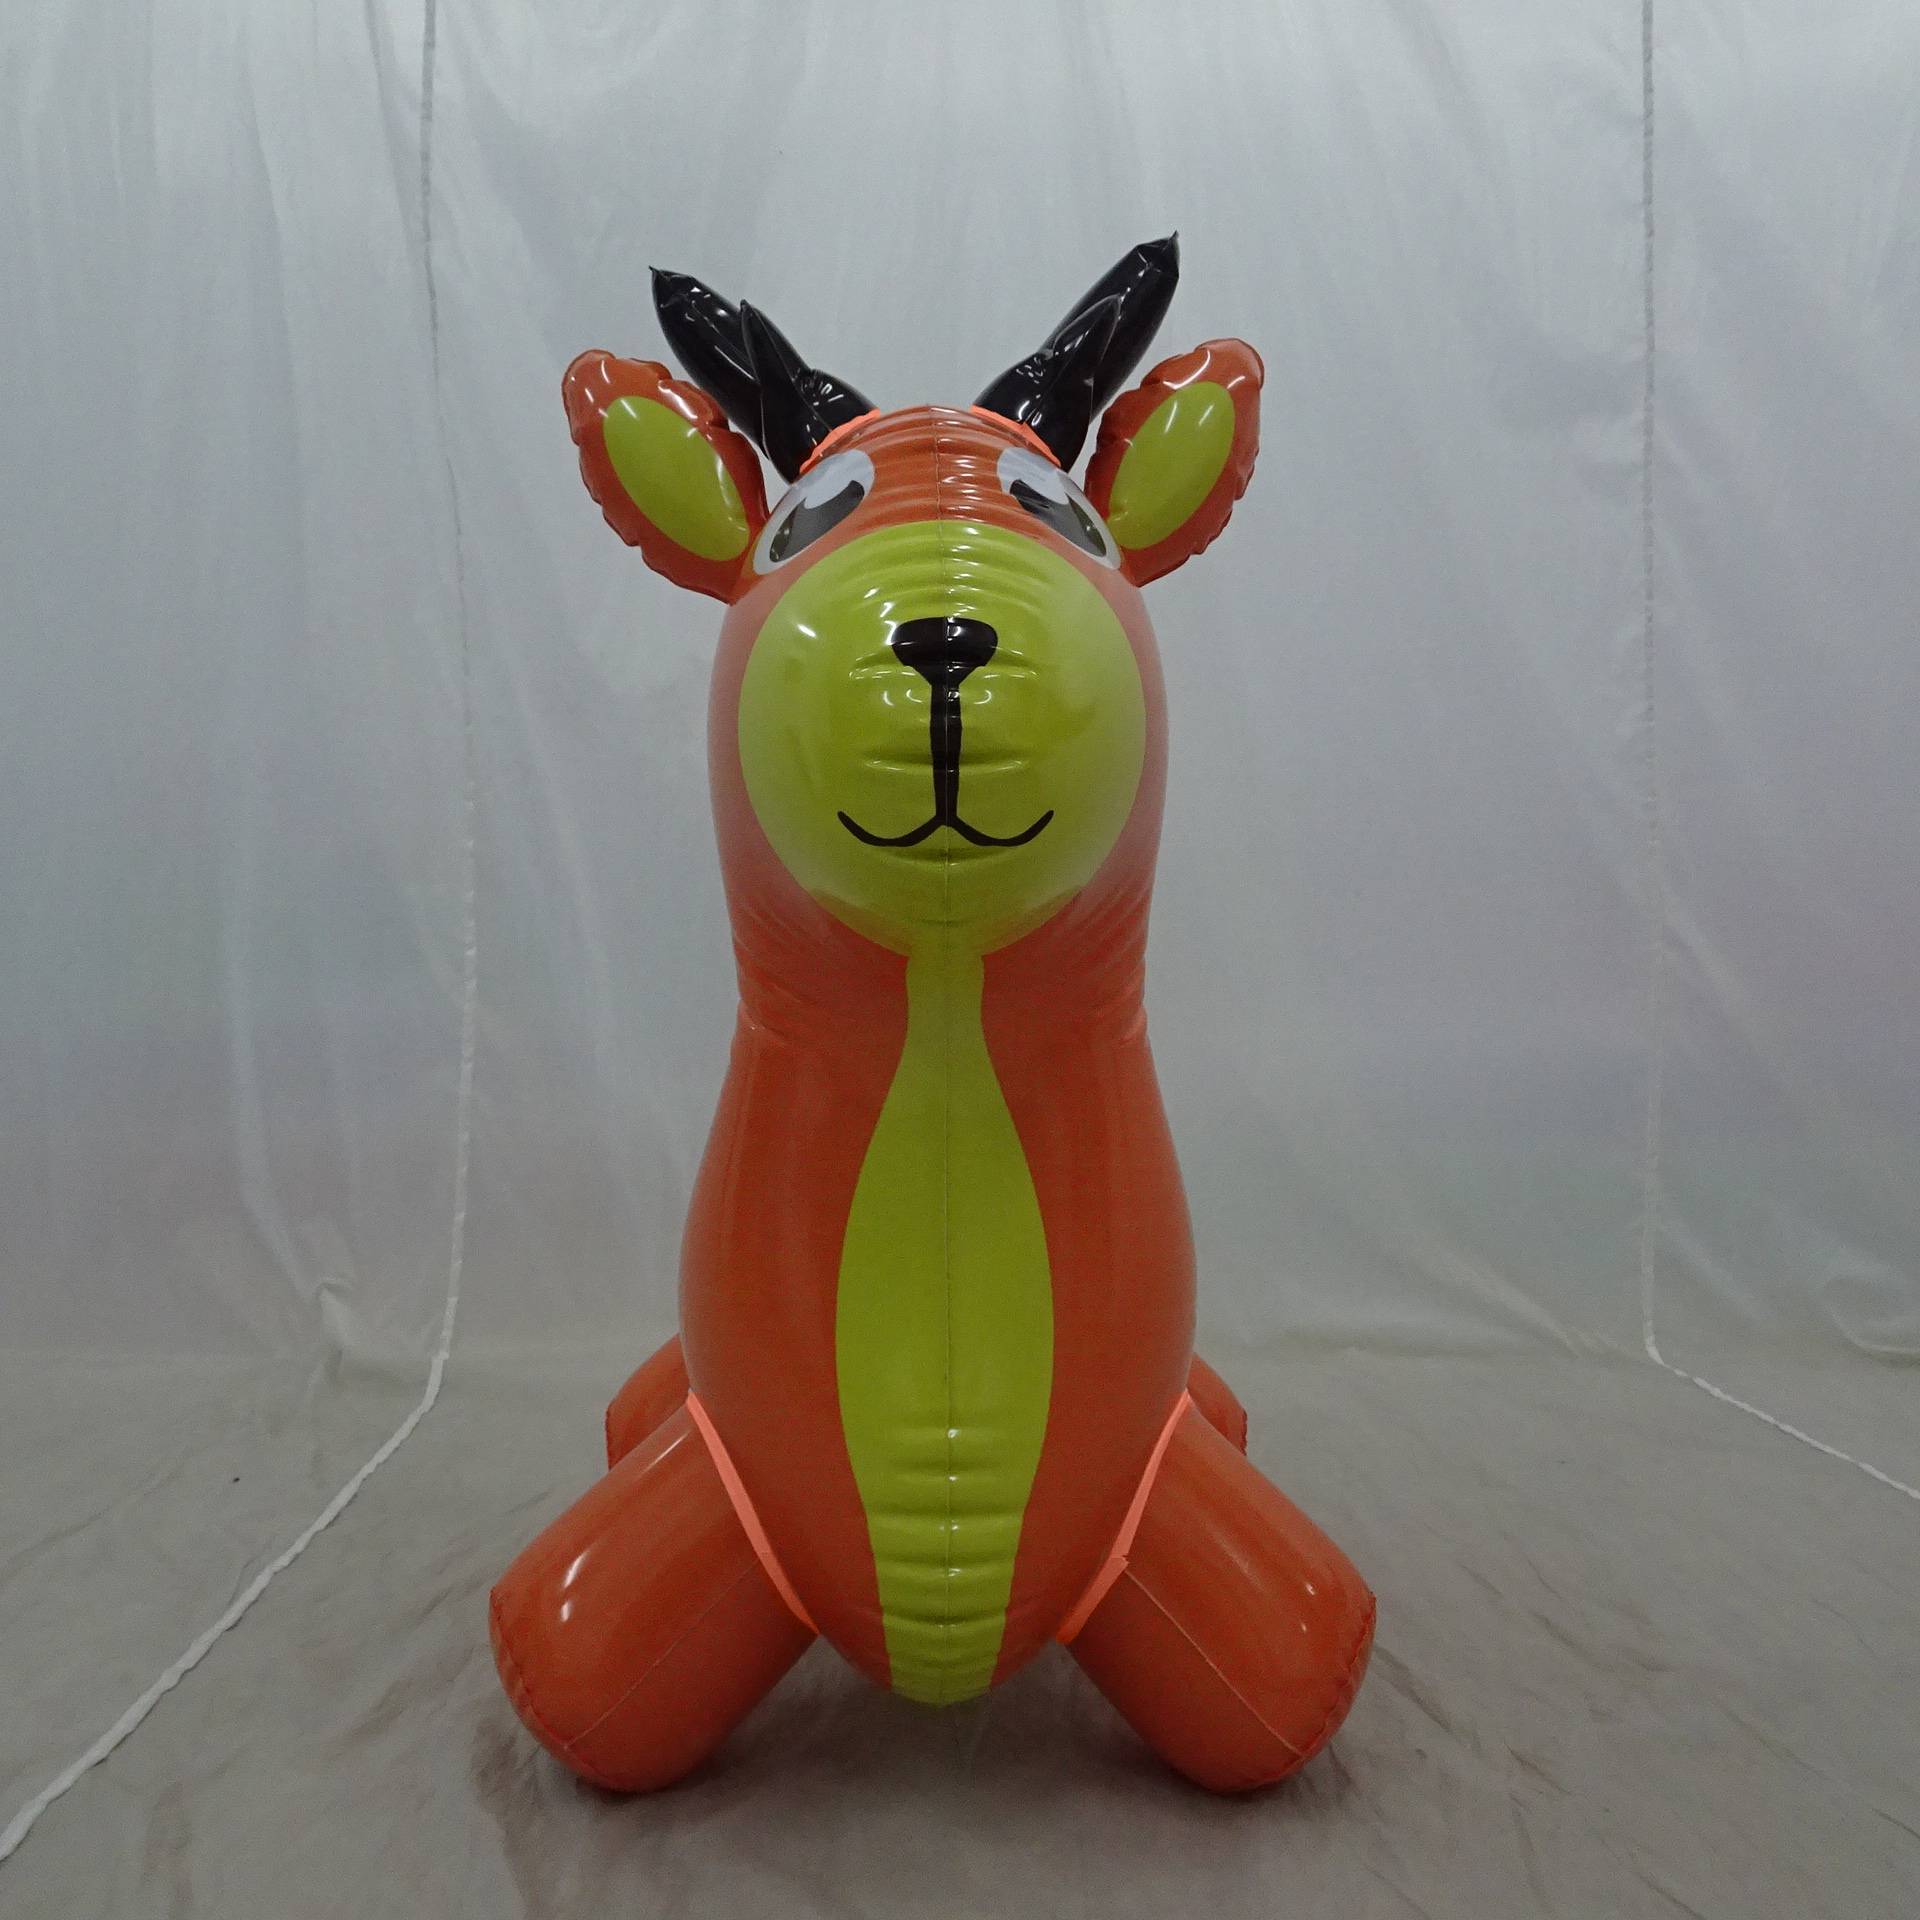 Customised Inflatable Deer Air Dorable Airblown Character Collection Of Realistic Deer Favors